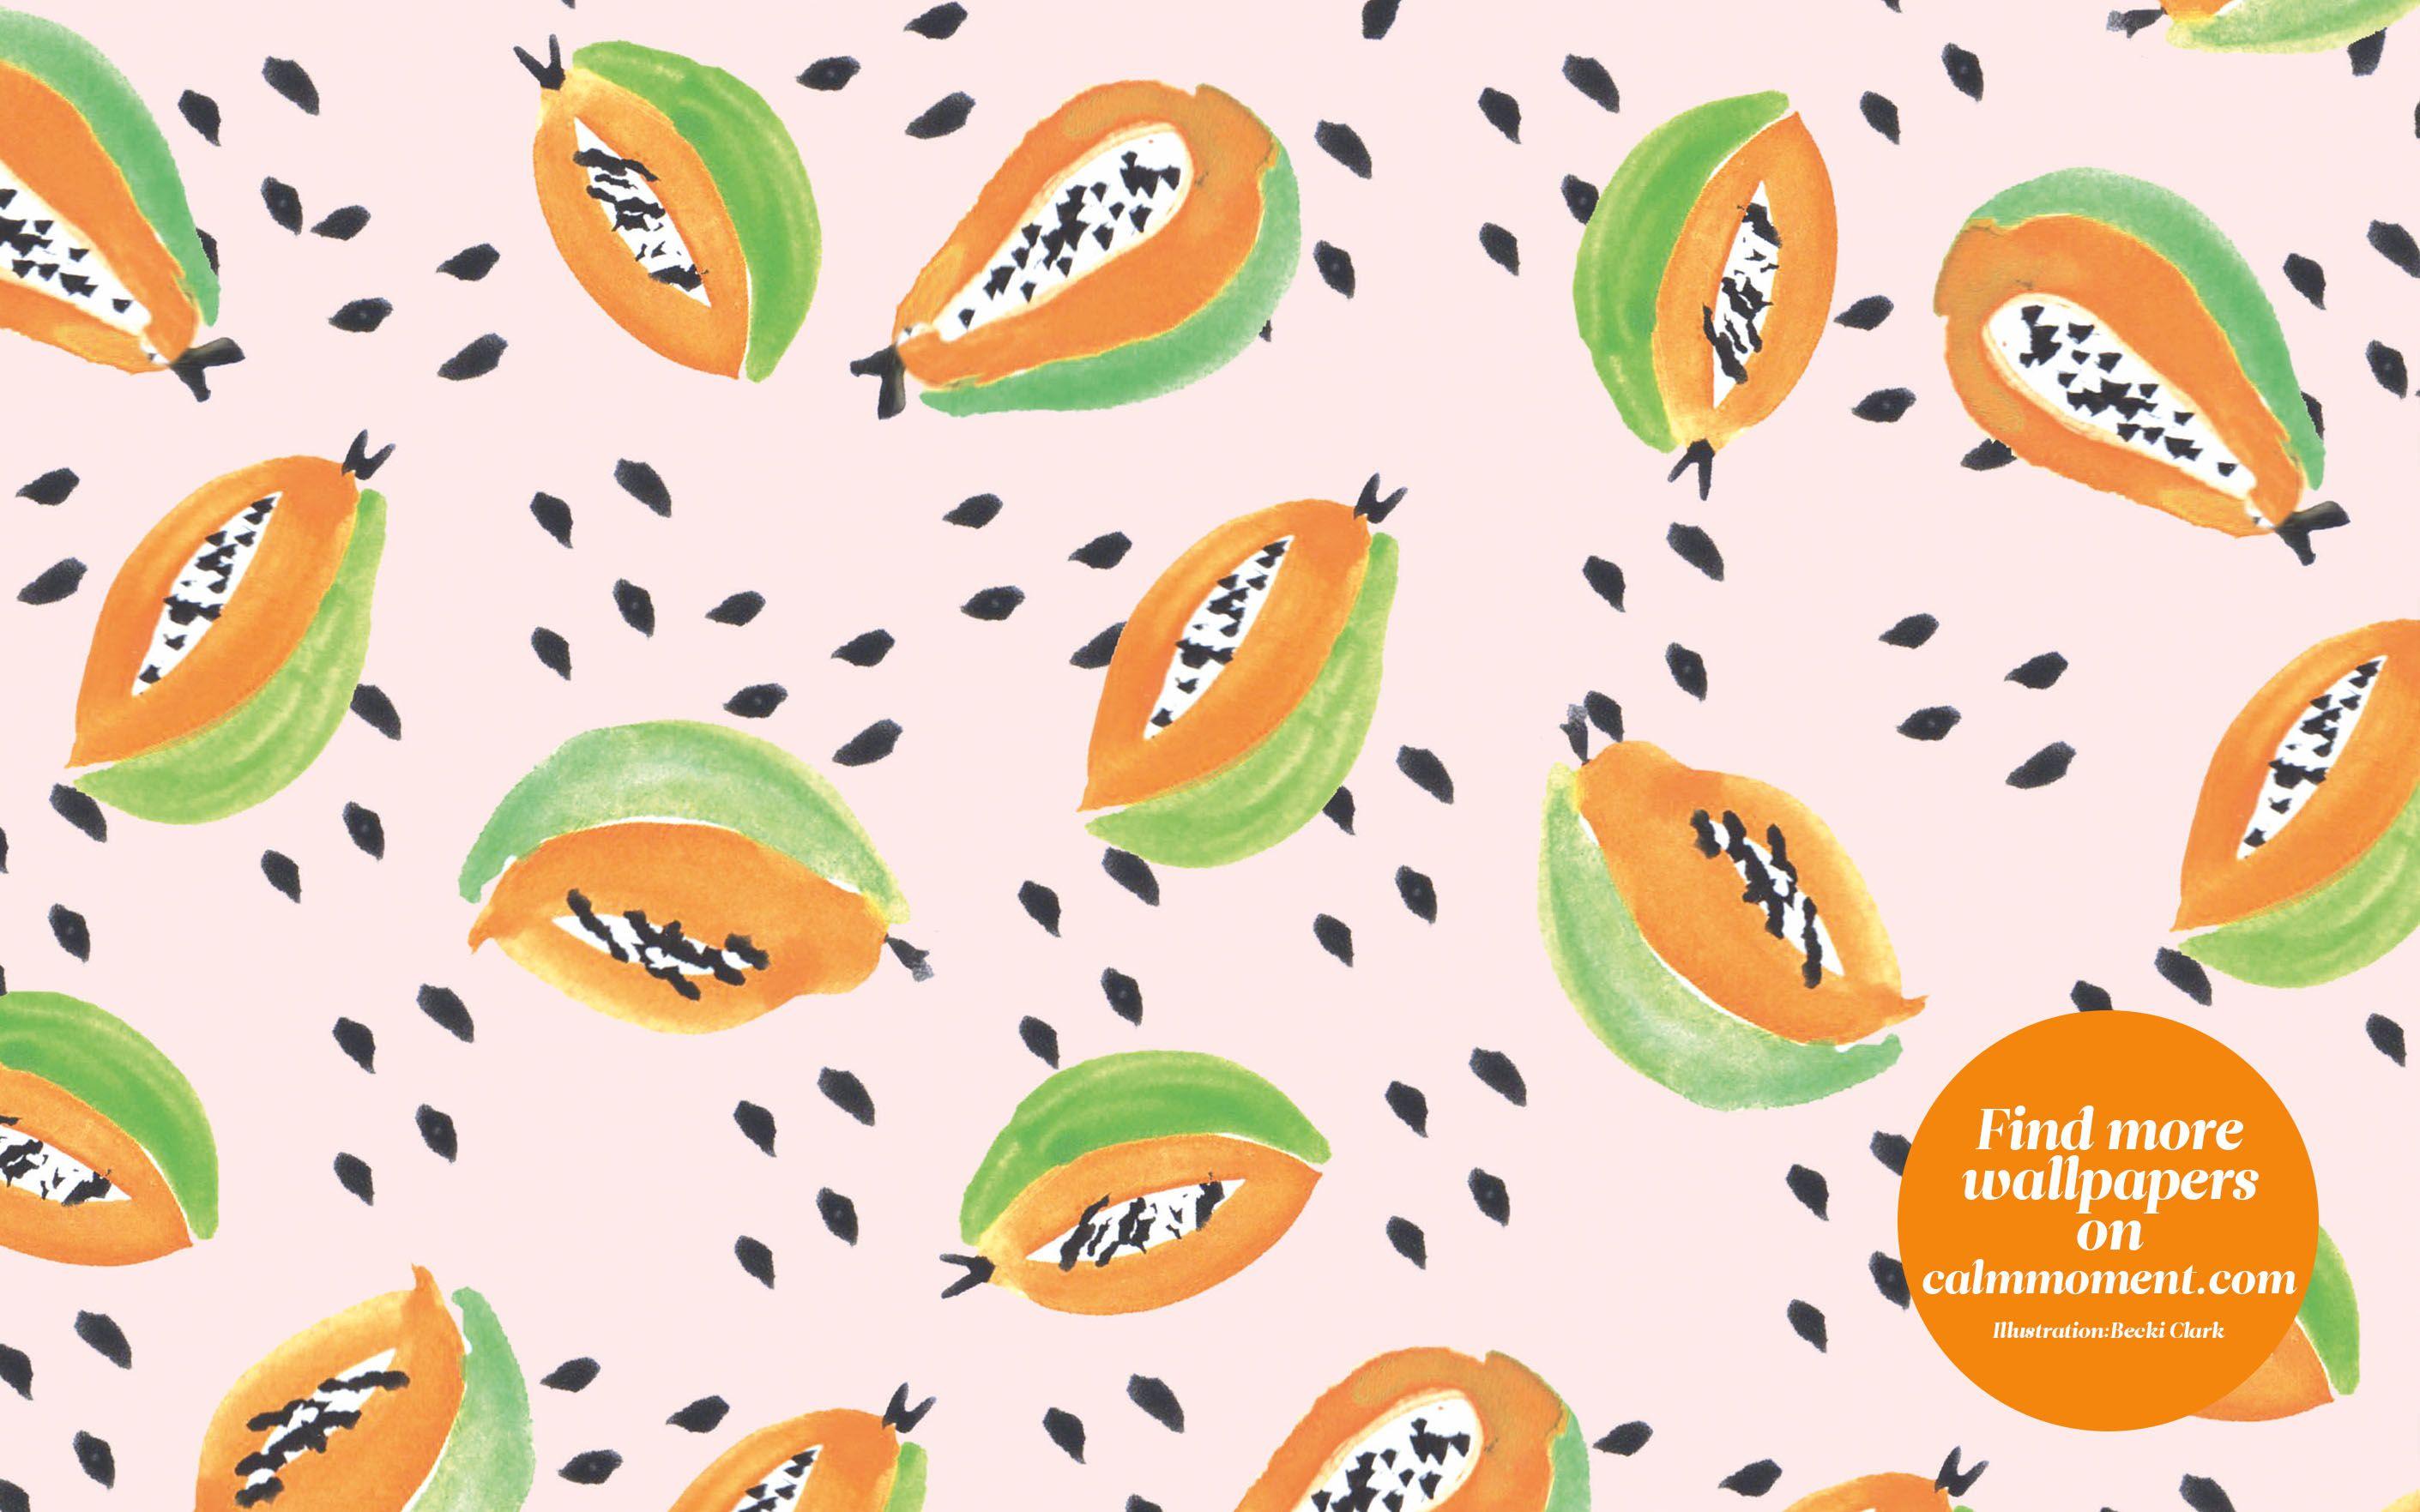 Download free illustrated papaya wallpaper for your phone, computer